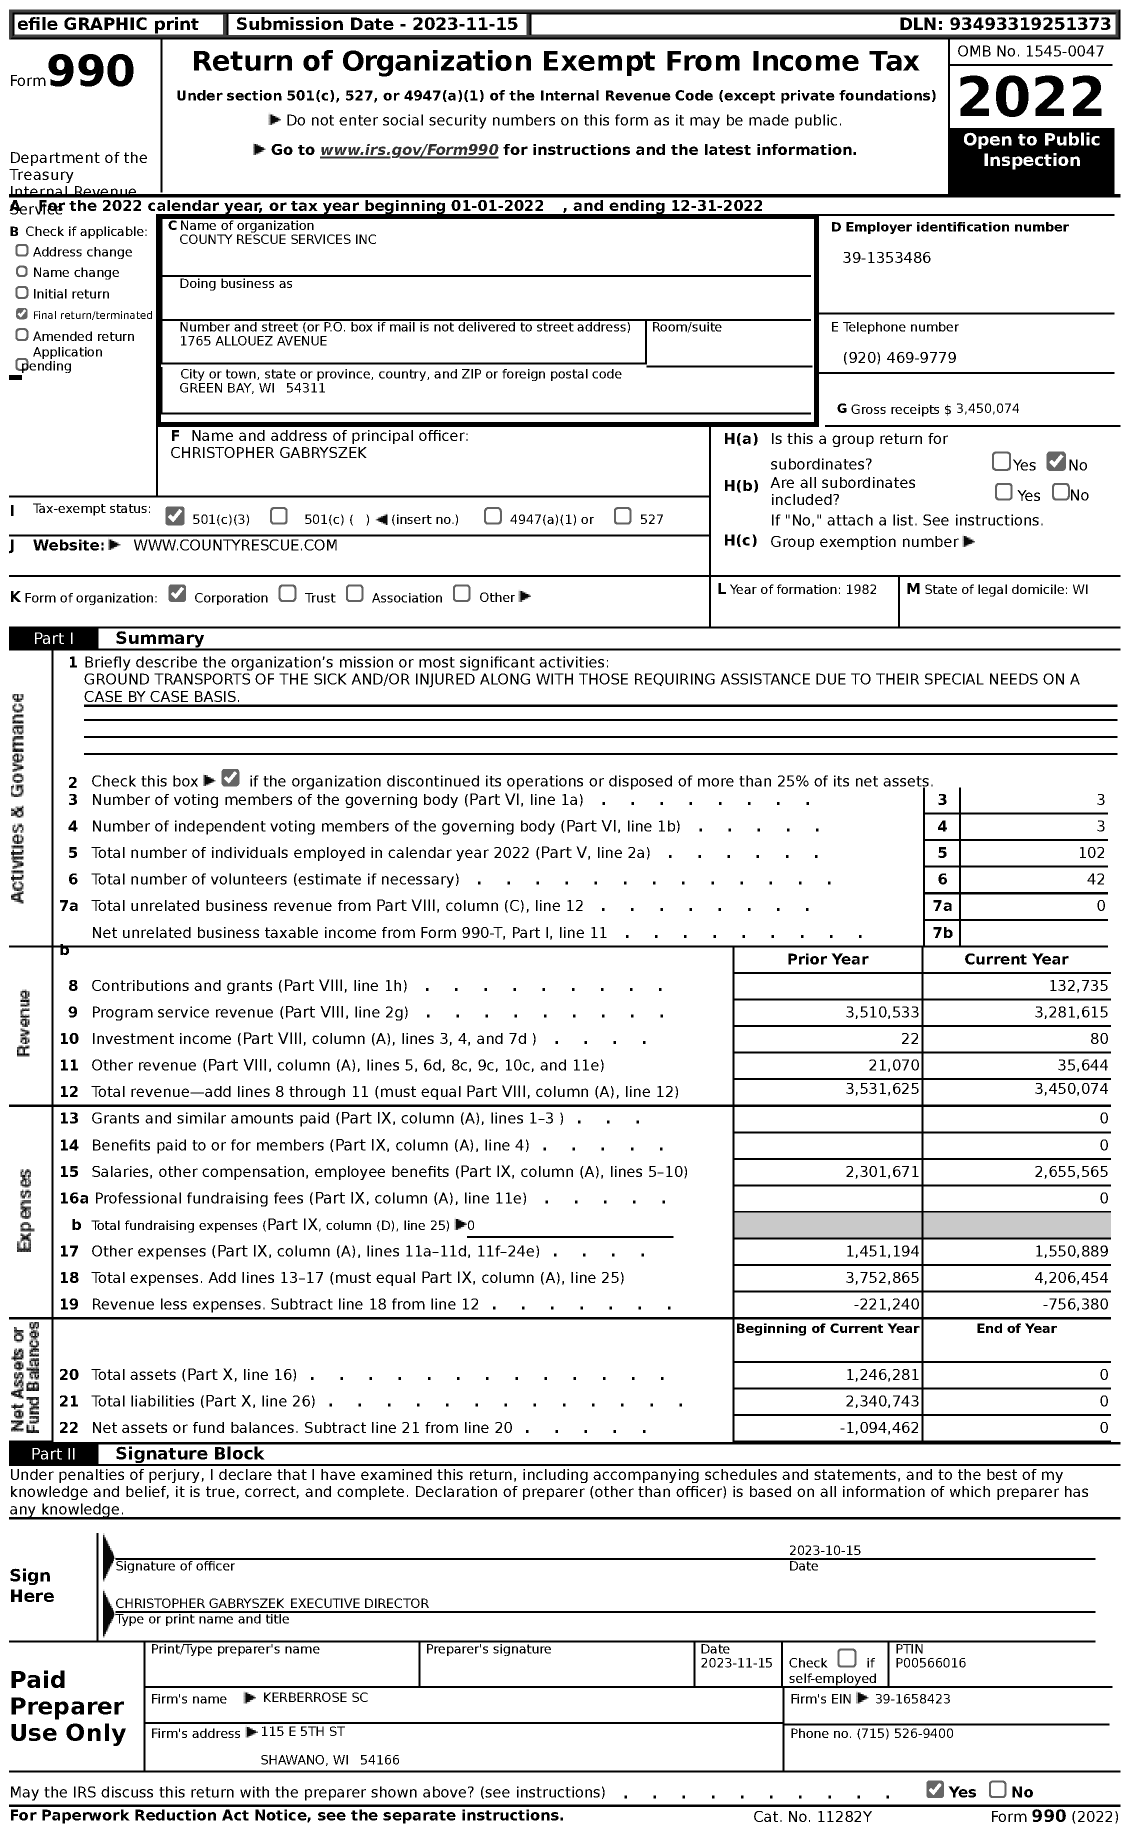 Image of first page of 2022 Form 990 for County Rescue Services